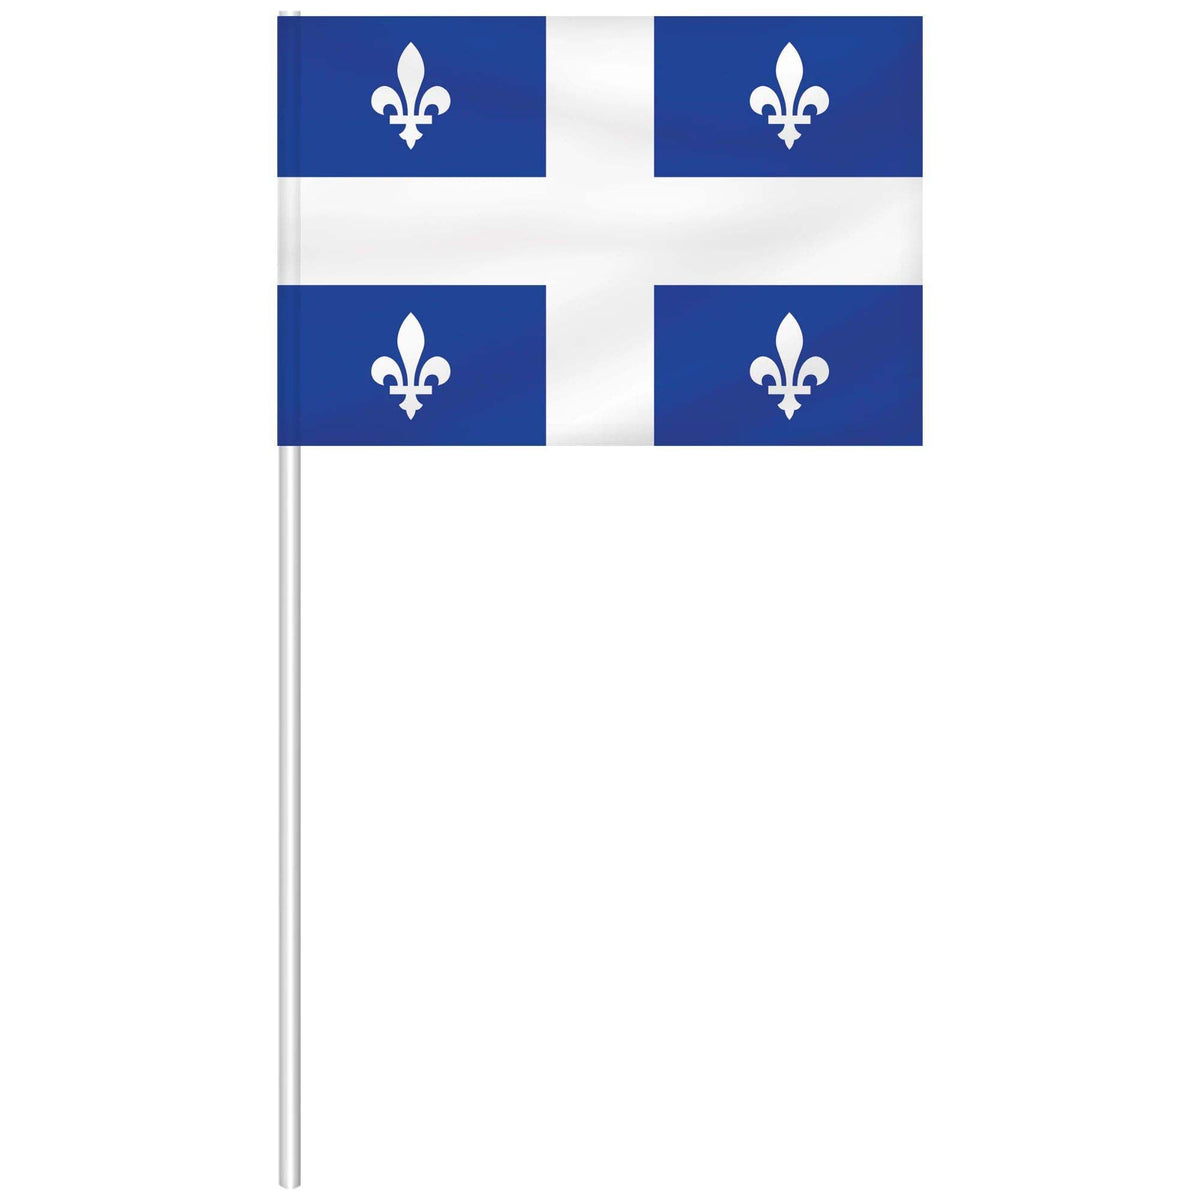 AMSCAN CA St-Jean-Baptiste Quebec Flag, 4 x 6 Inches, 1 Count